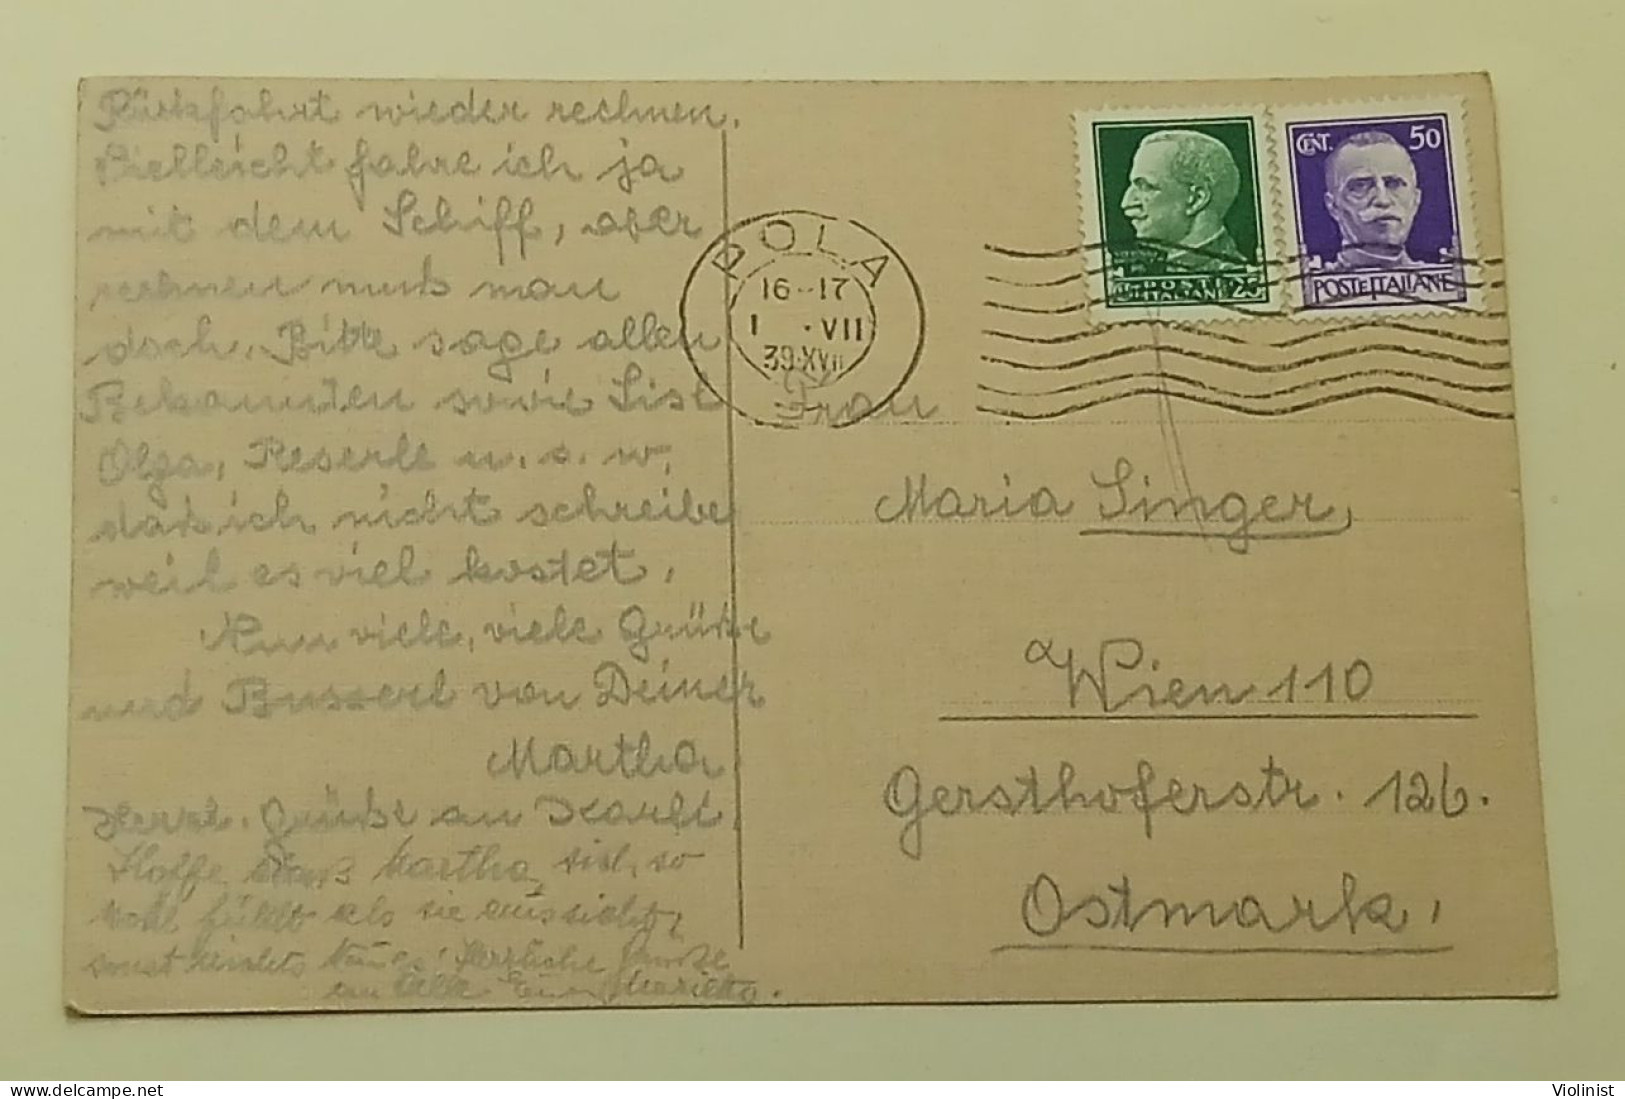 Italian Post - Stationery Sent From Pula To Vienna - Postmark POLA 1939. - Entiers Postaux